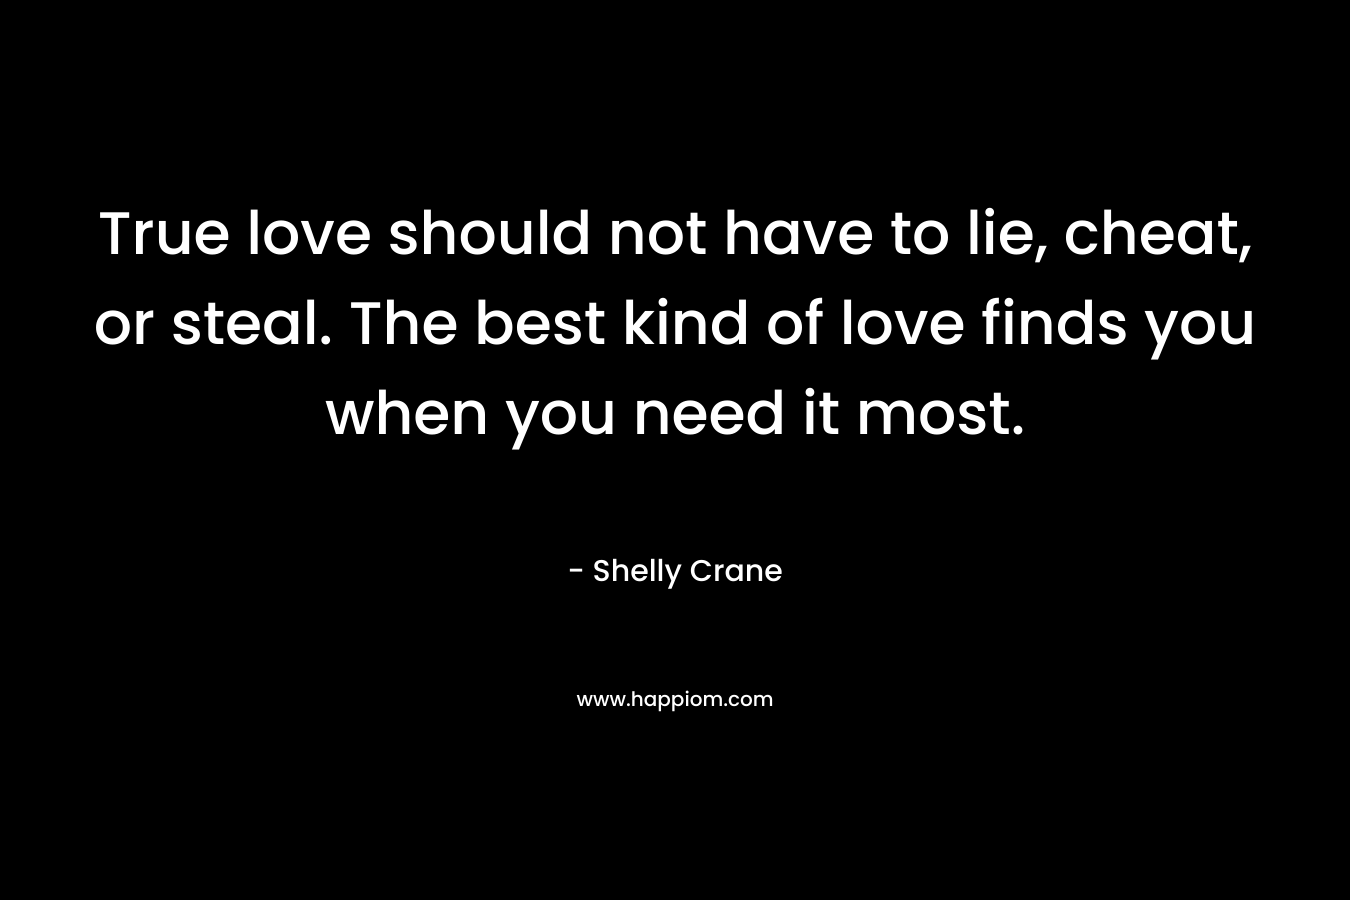 True love should not have to lie, cheat, or steal. The best kind of love finds you when you need it most. – Shelly Crane